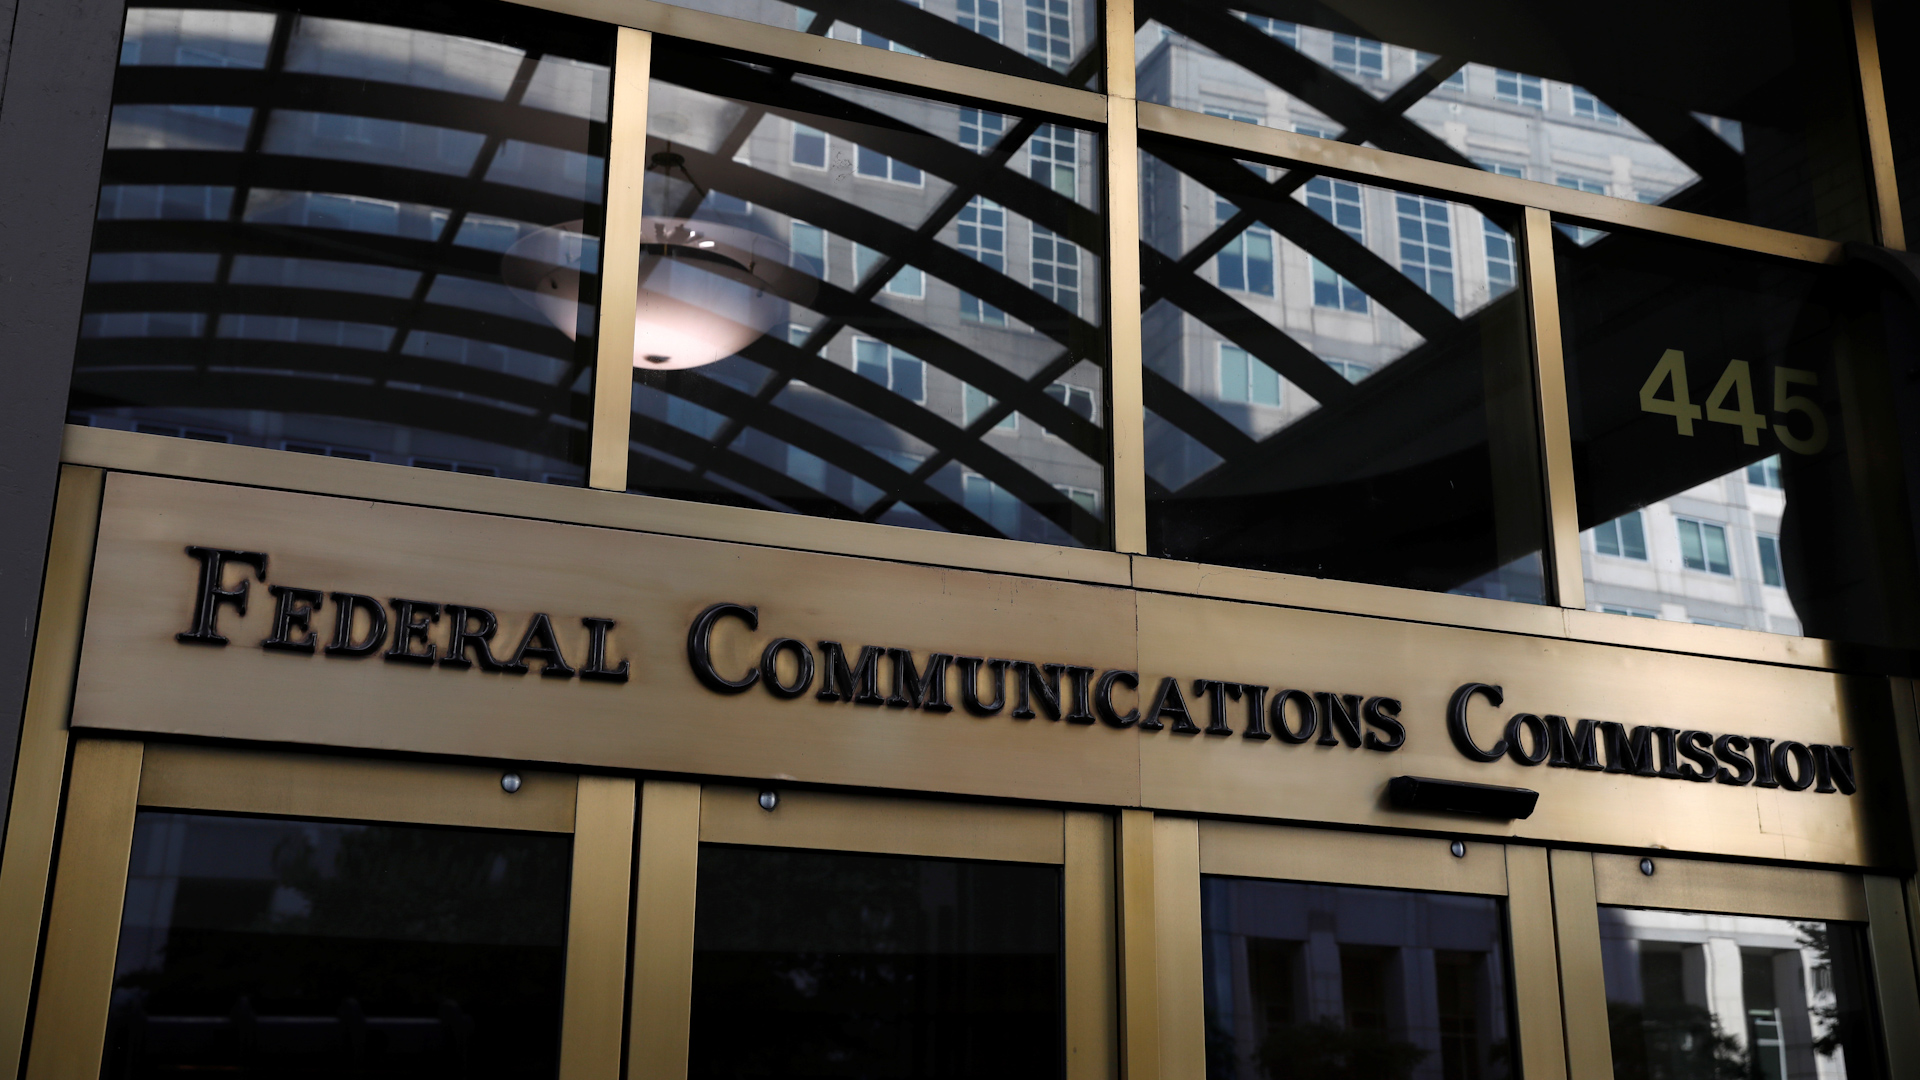 The Federal Communications Commission fined major wireless carriers nearly 0 million for illegally sharing customer data without consent.